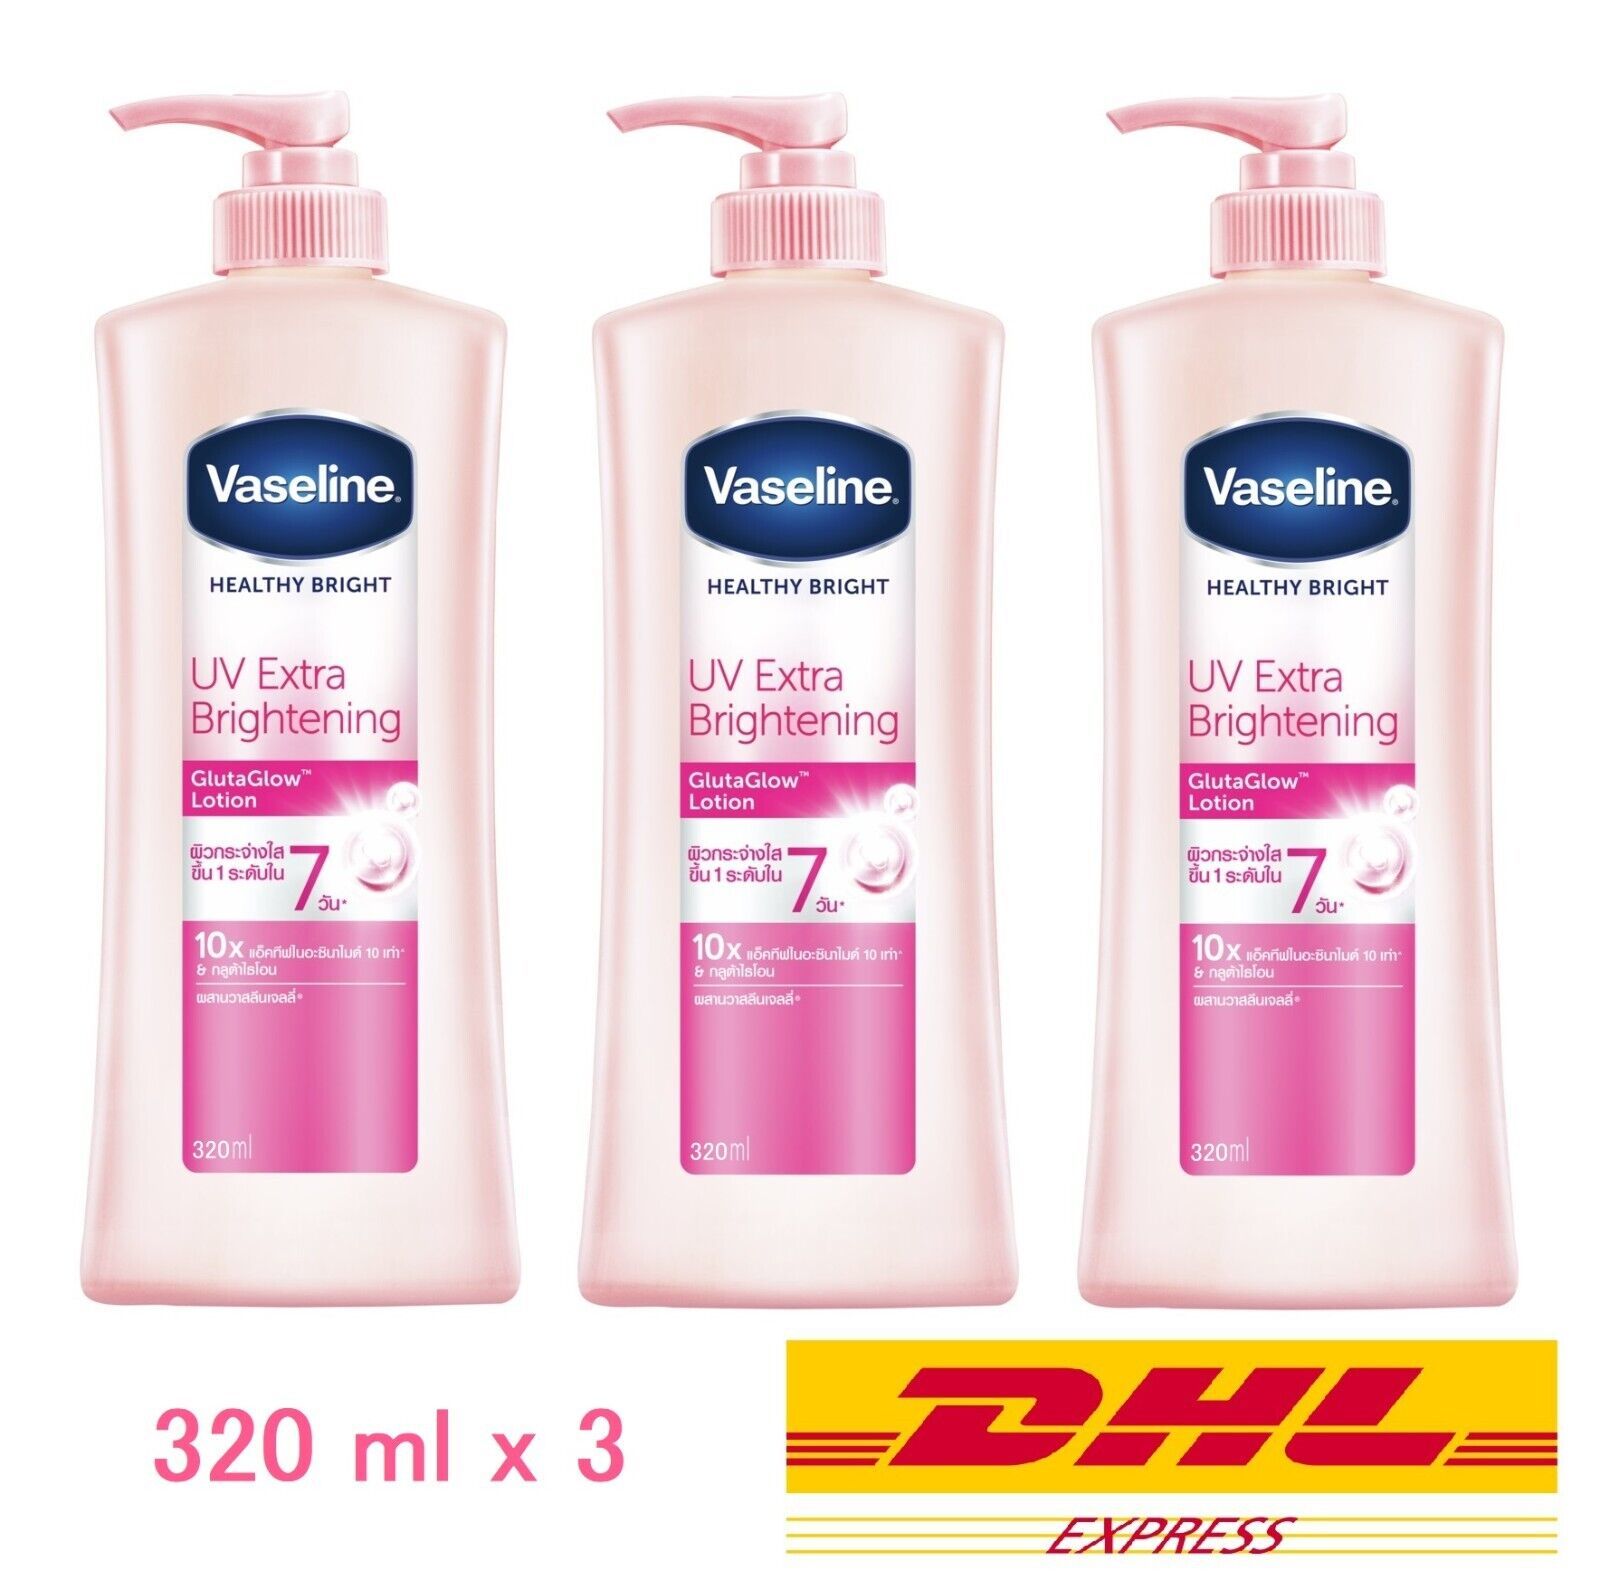 Primary image for 3 x Vaseline Body Lotion Healthy Bright UV Extra Brightening Pink Gluta 320ml